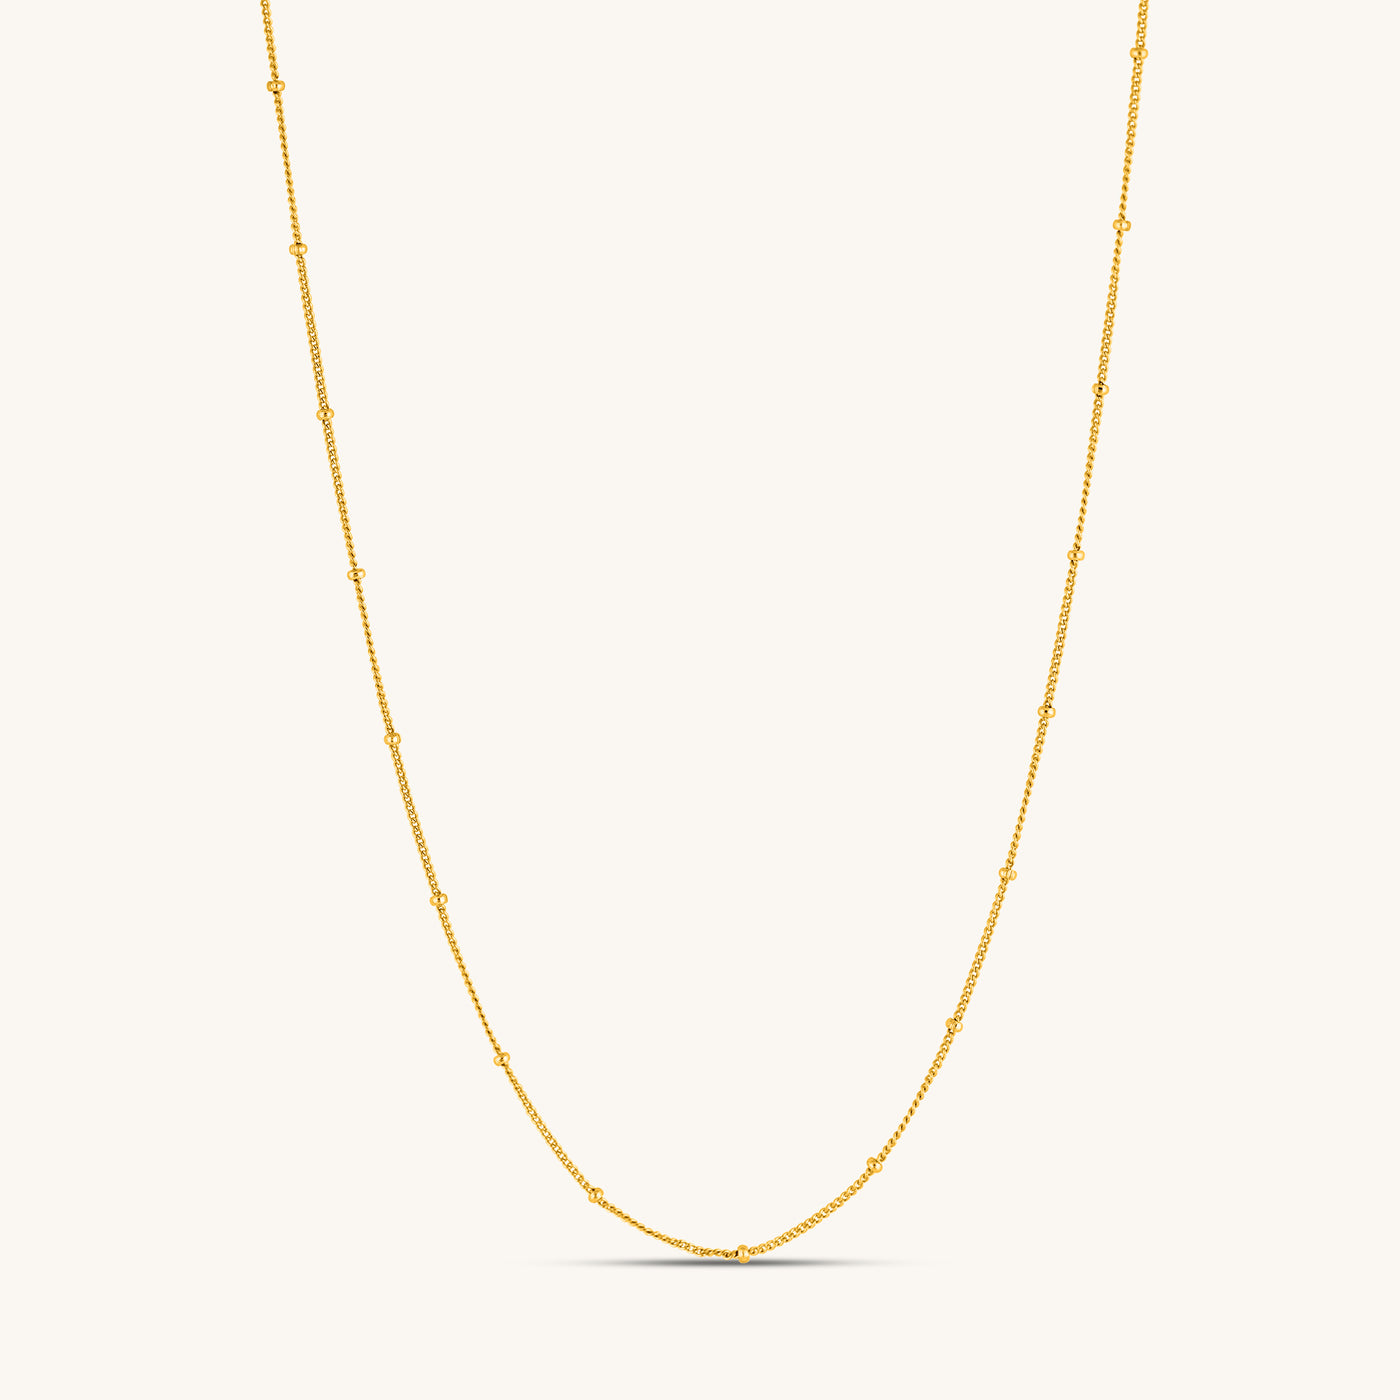 Modern Minimalist Jewelry Women's Necklace Choker Satellite baby curb chain 18k Gold layered on 925 Sterling Silver